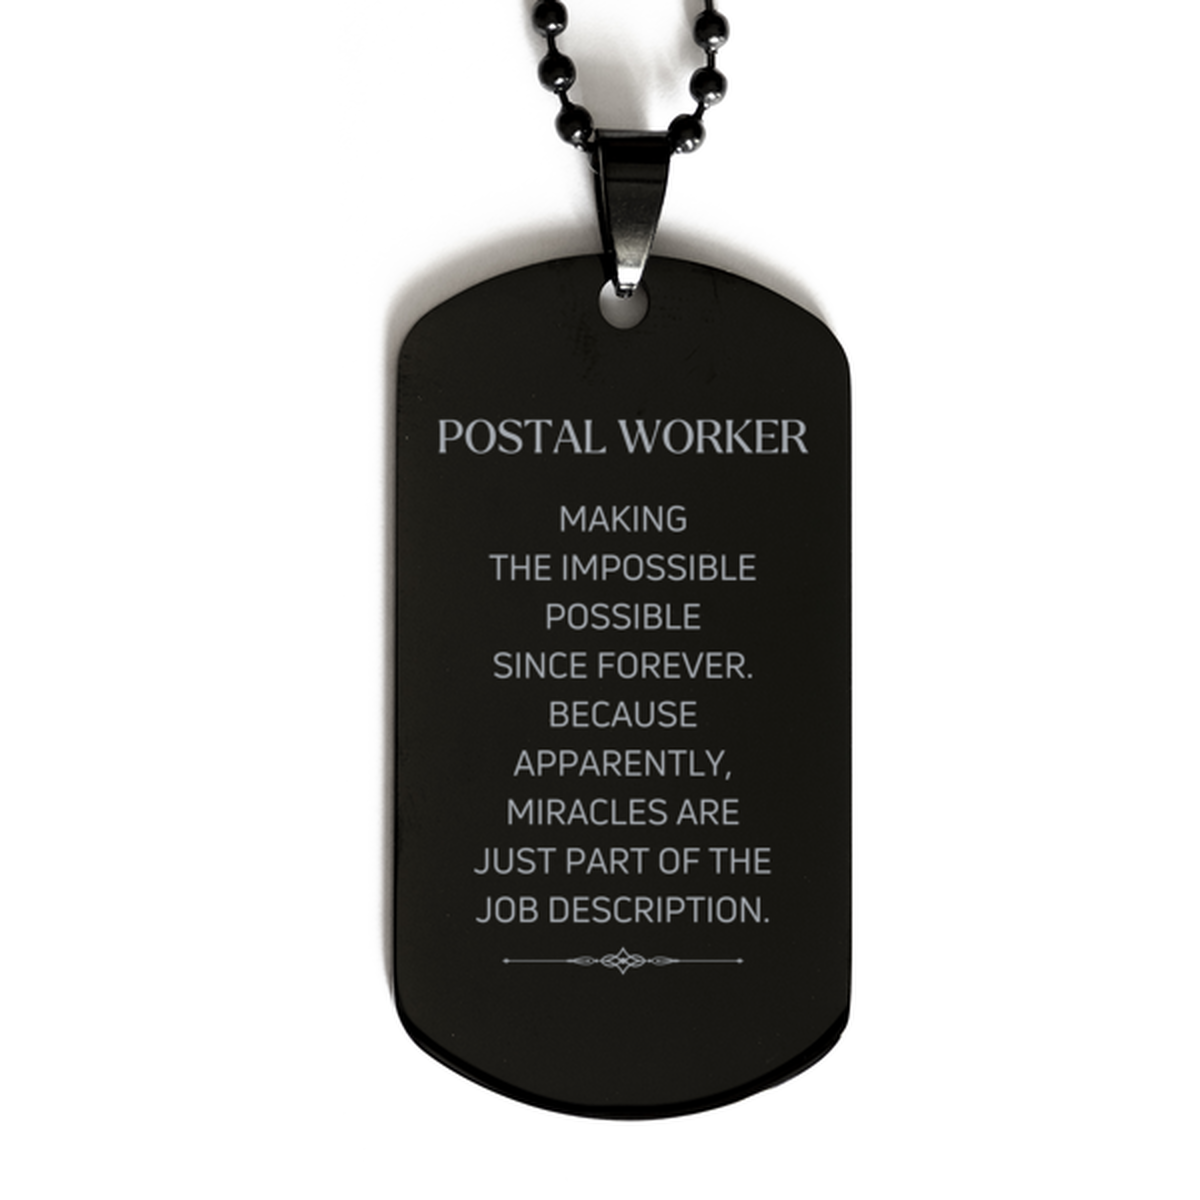 Funny Postal Worker Gifts, Miracles are just part of the job description, Inspirational Birthday Black Dog Tag For Postal Worker, Men, Women, Coworkers, Friends, Boss